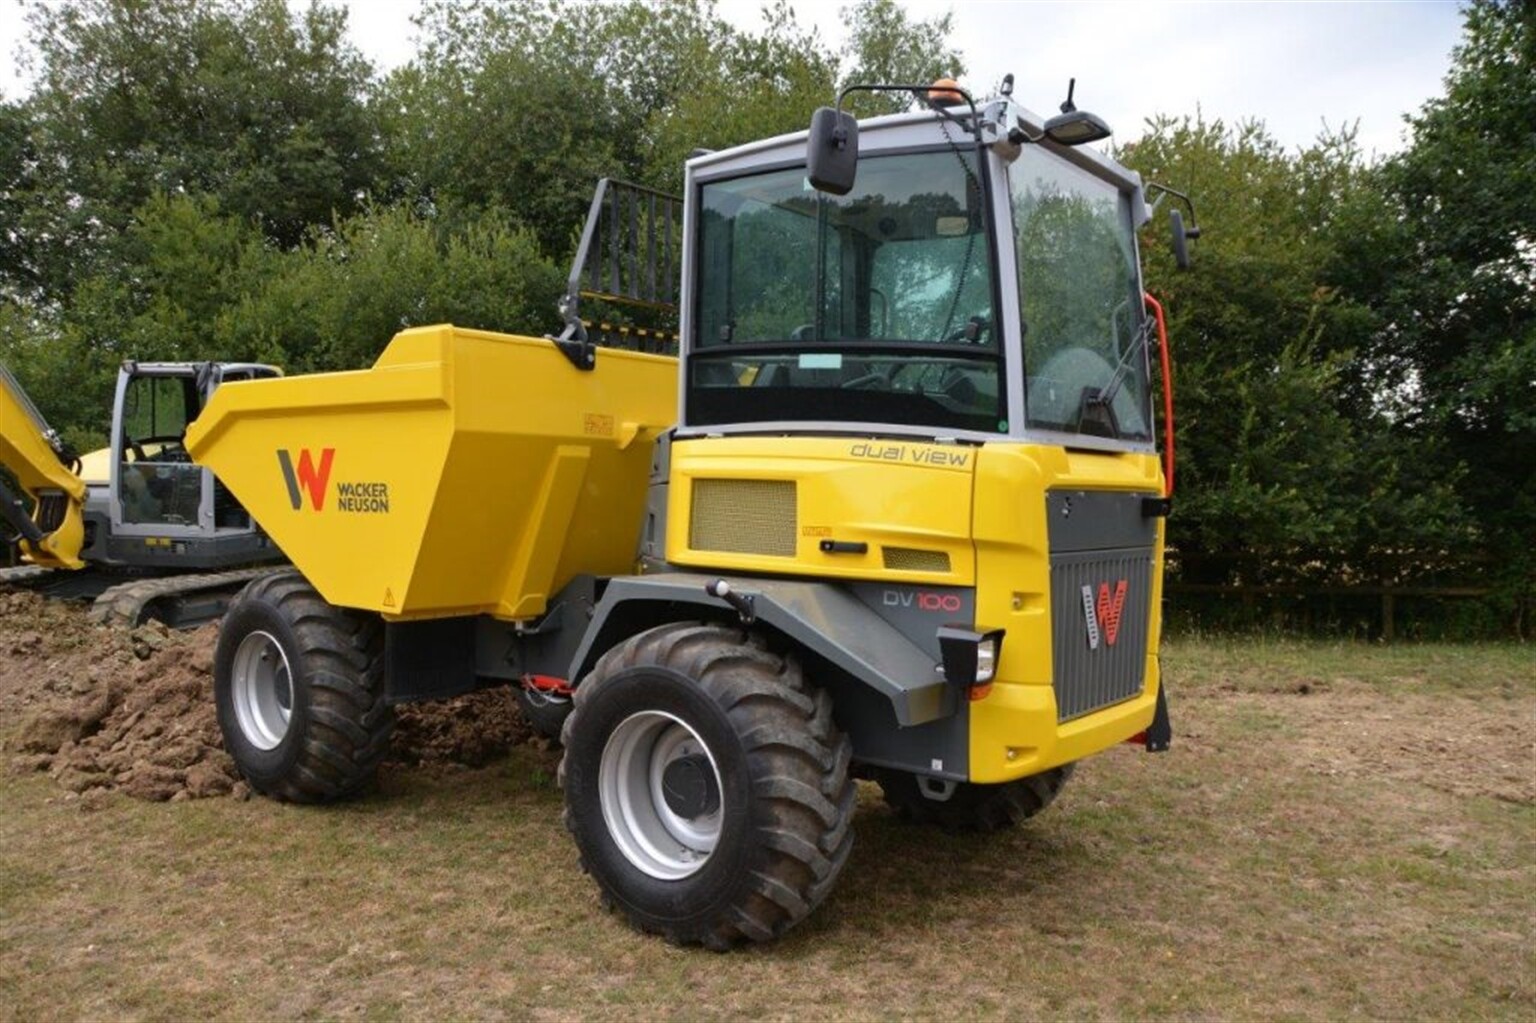 Wacker Neuson and Hidromek kit gather for New Forest dig-in